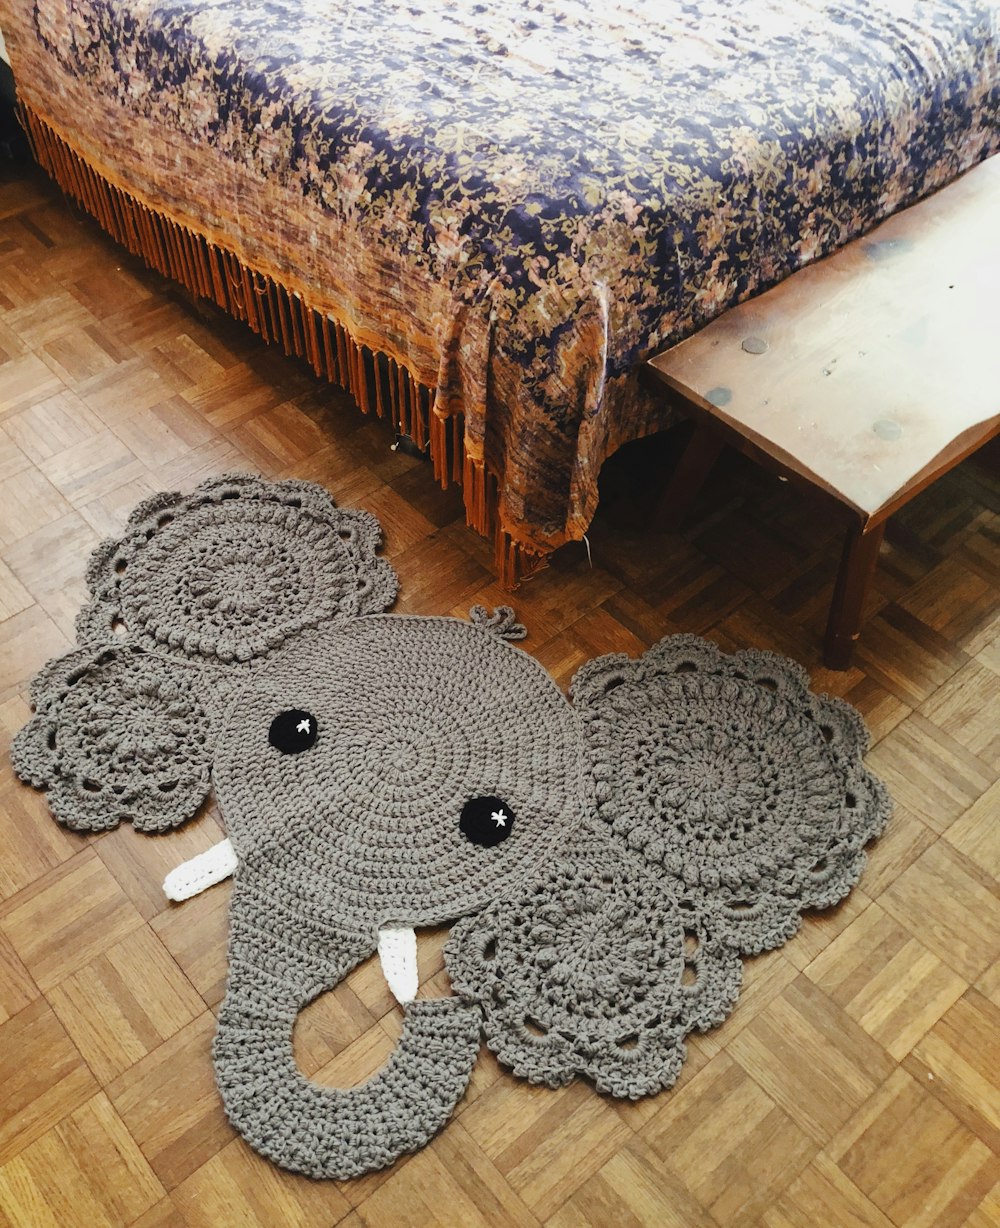 black and gray elephant plush toy on brown wooden table